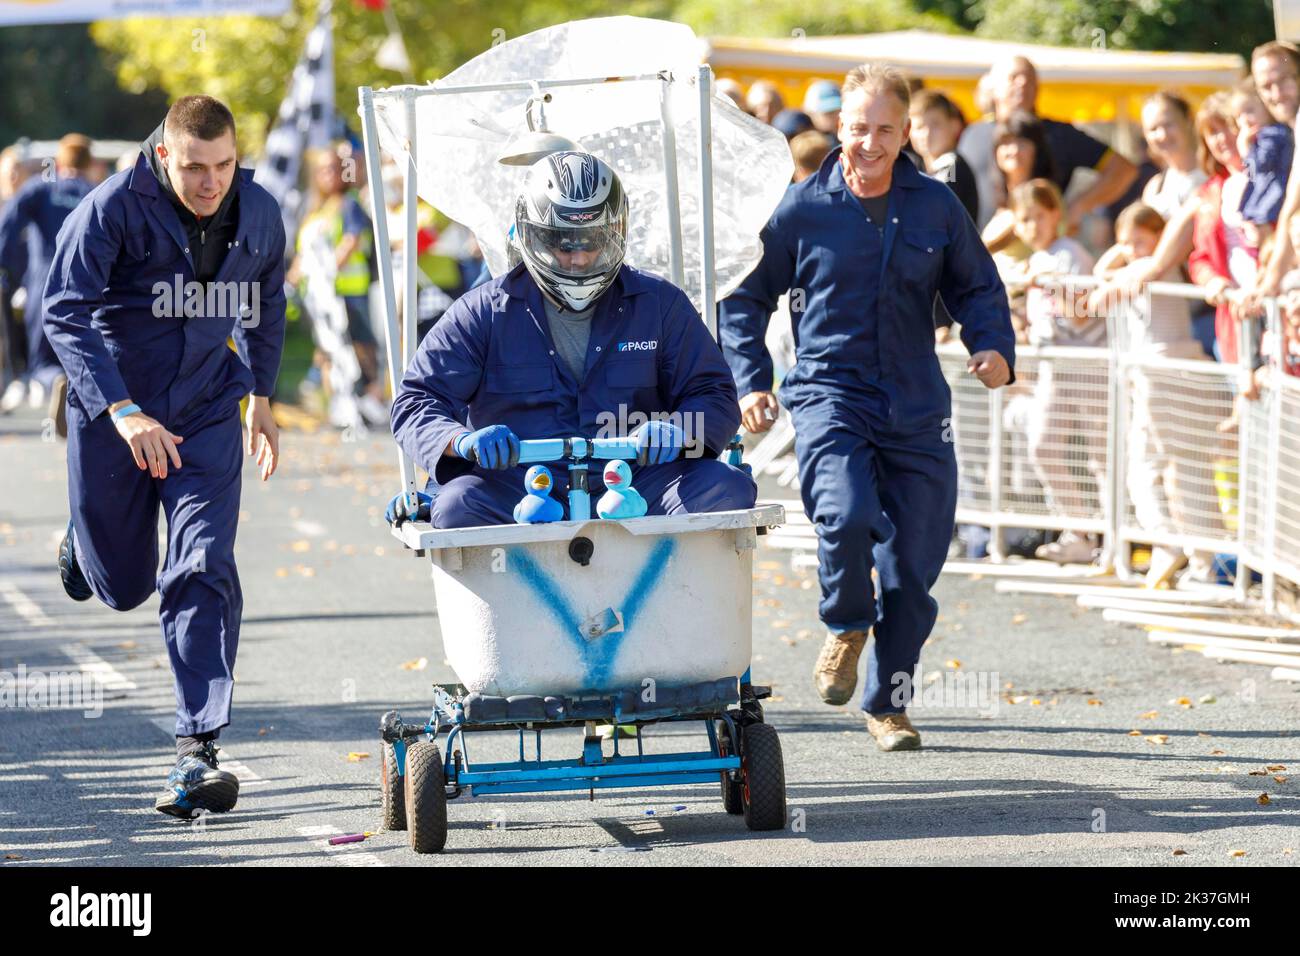 Eastbourne, UK. 25th Sep 2022. Participants enjoy a sunny day in Eastbourne as they take part in the annual soapbox race. Eastbourne, East Sussex,UK. Credit: Ed Brown/Alamy Live News Stock Photo